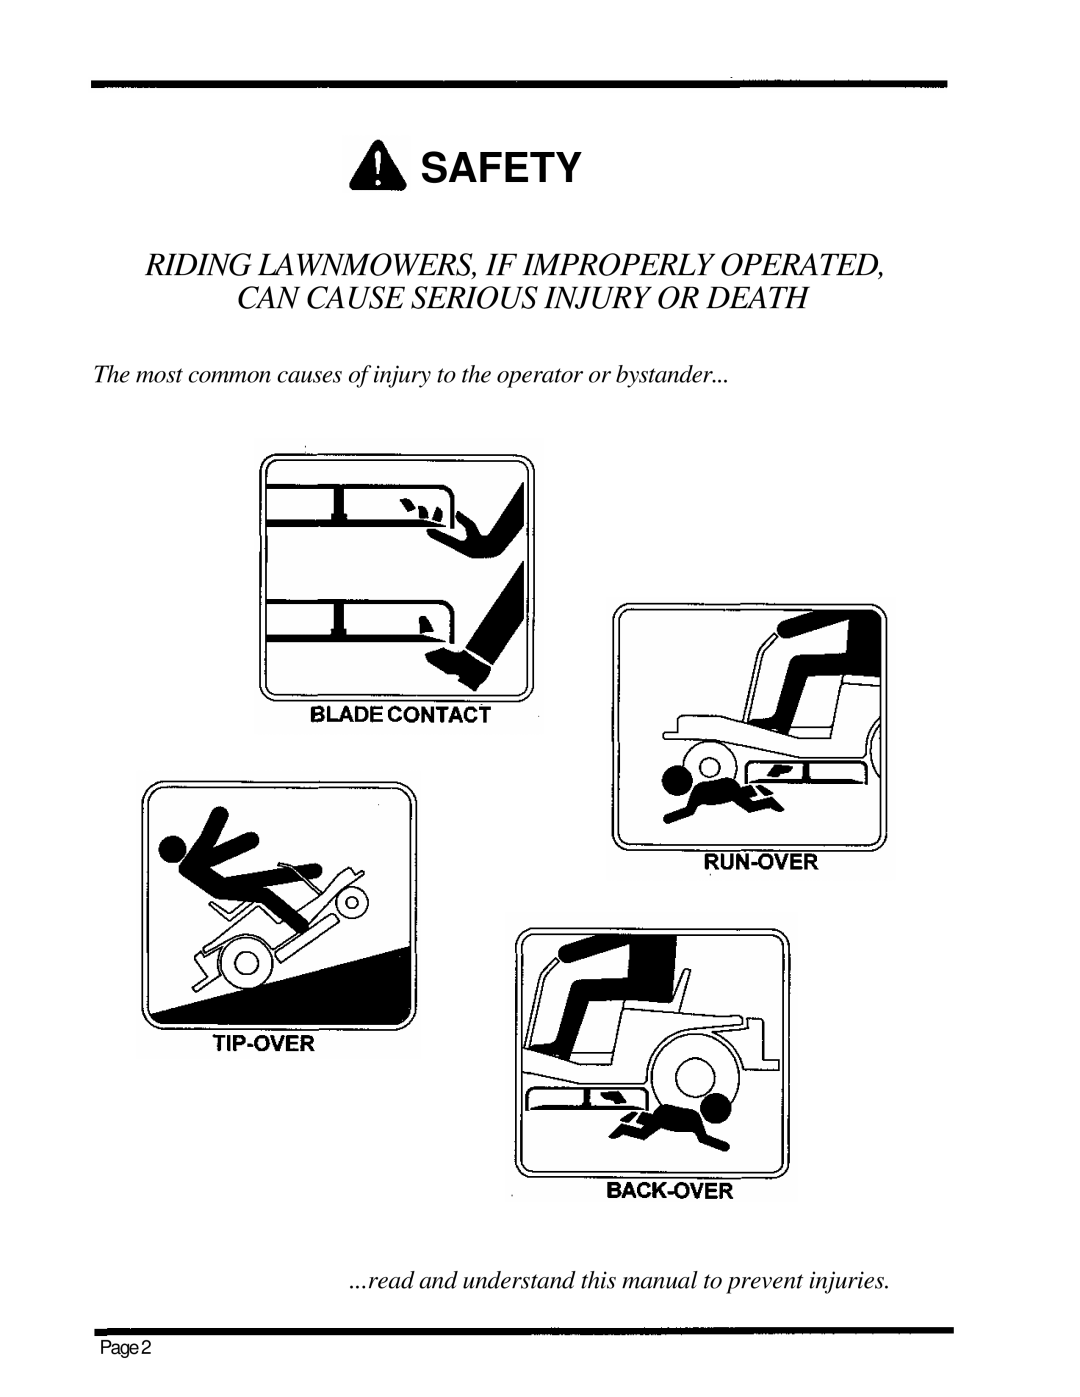 Dixon 5000 Series manual Safety, The most common causes of injury to the operator or bystander 